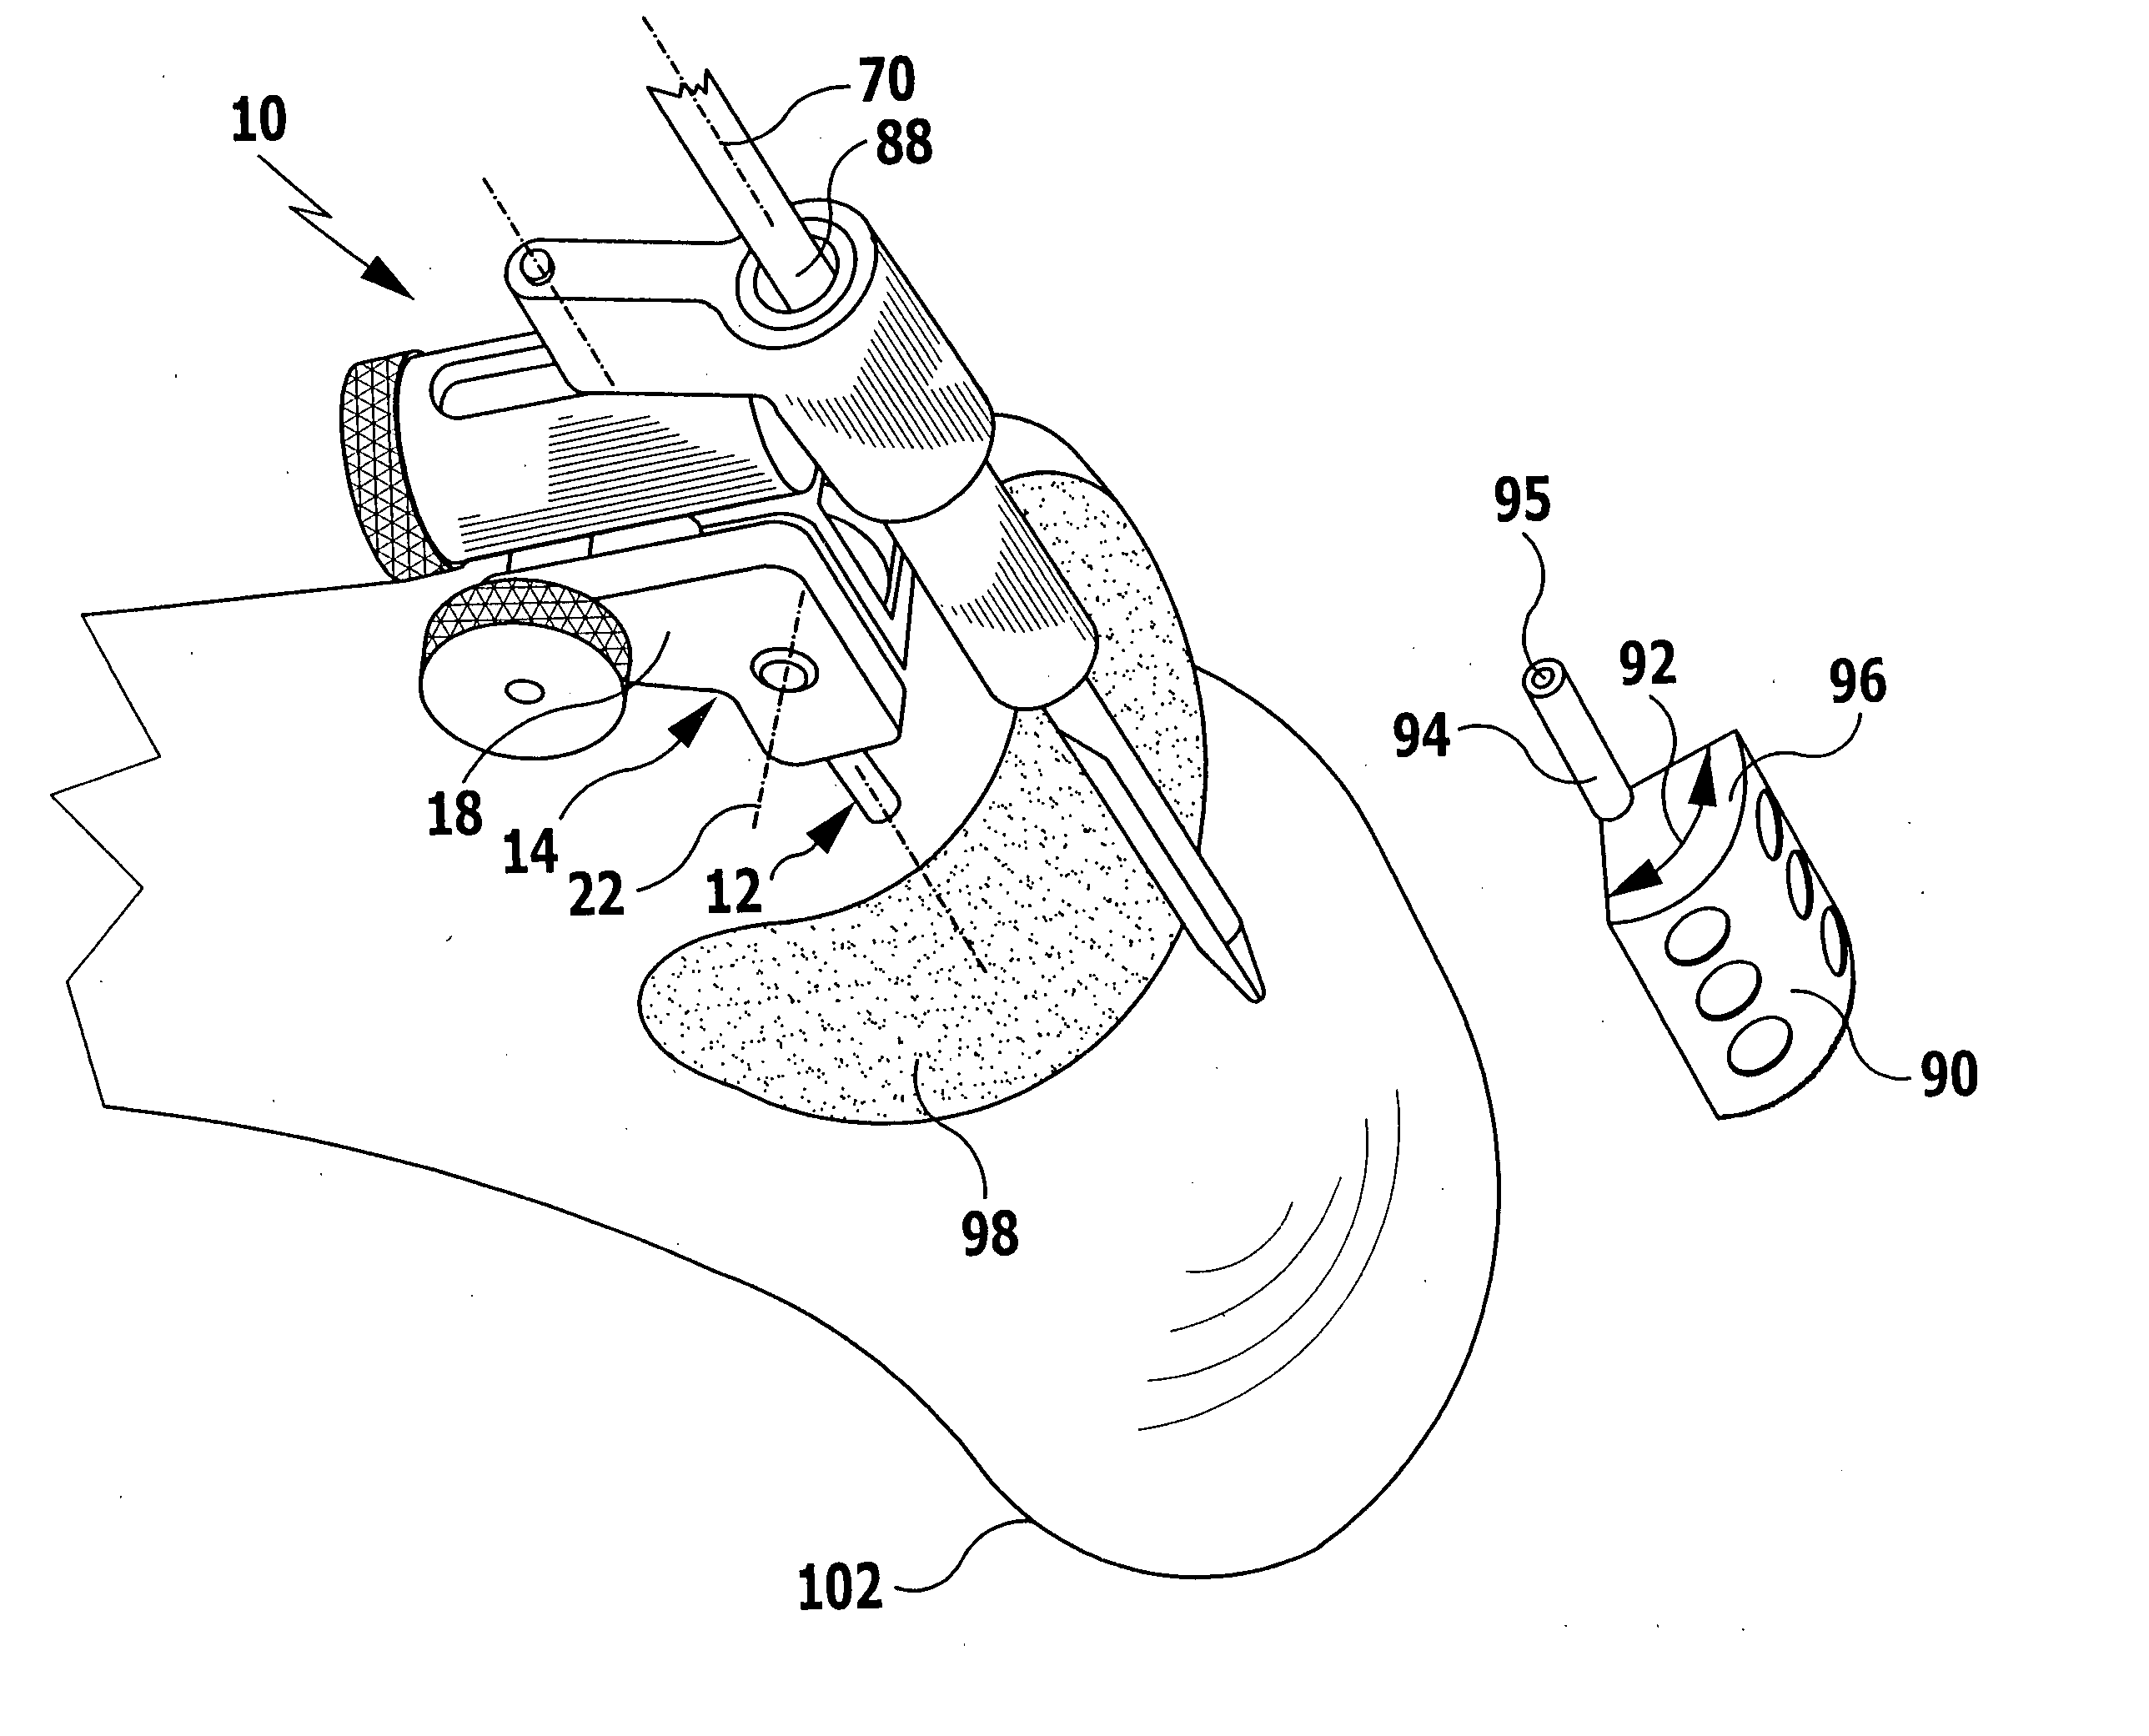 Surgical positioning and holding device